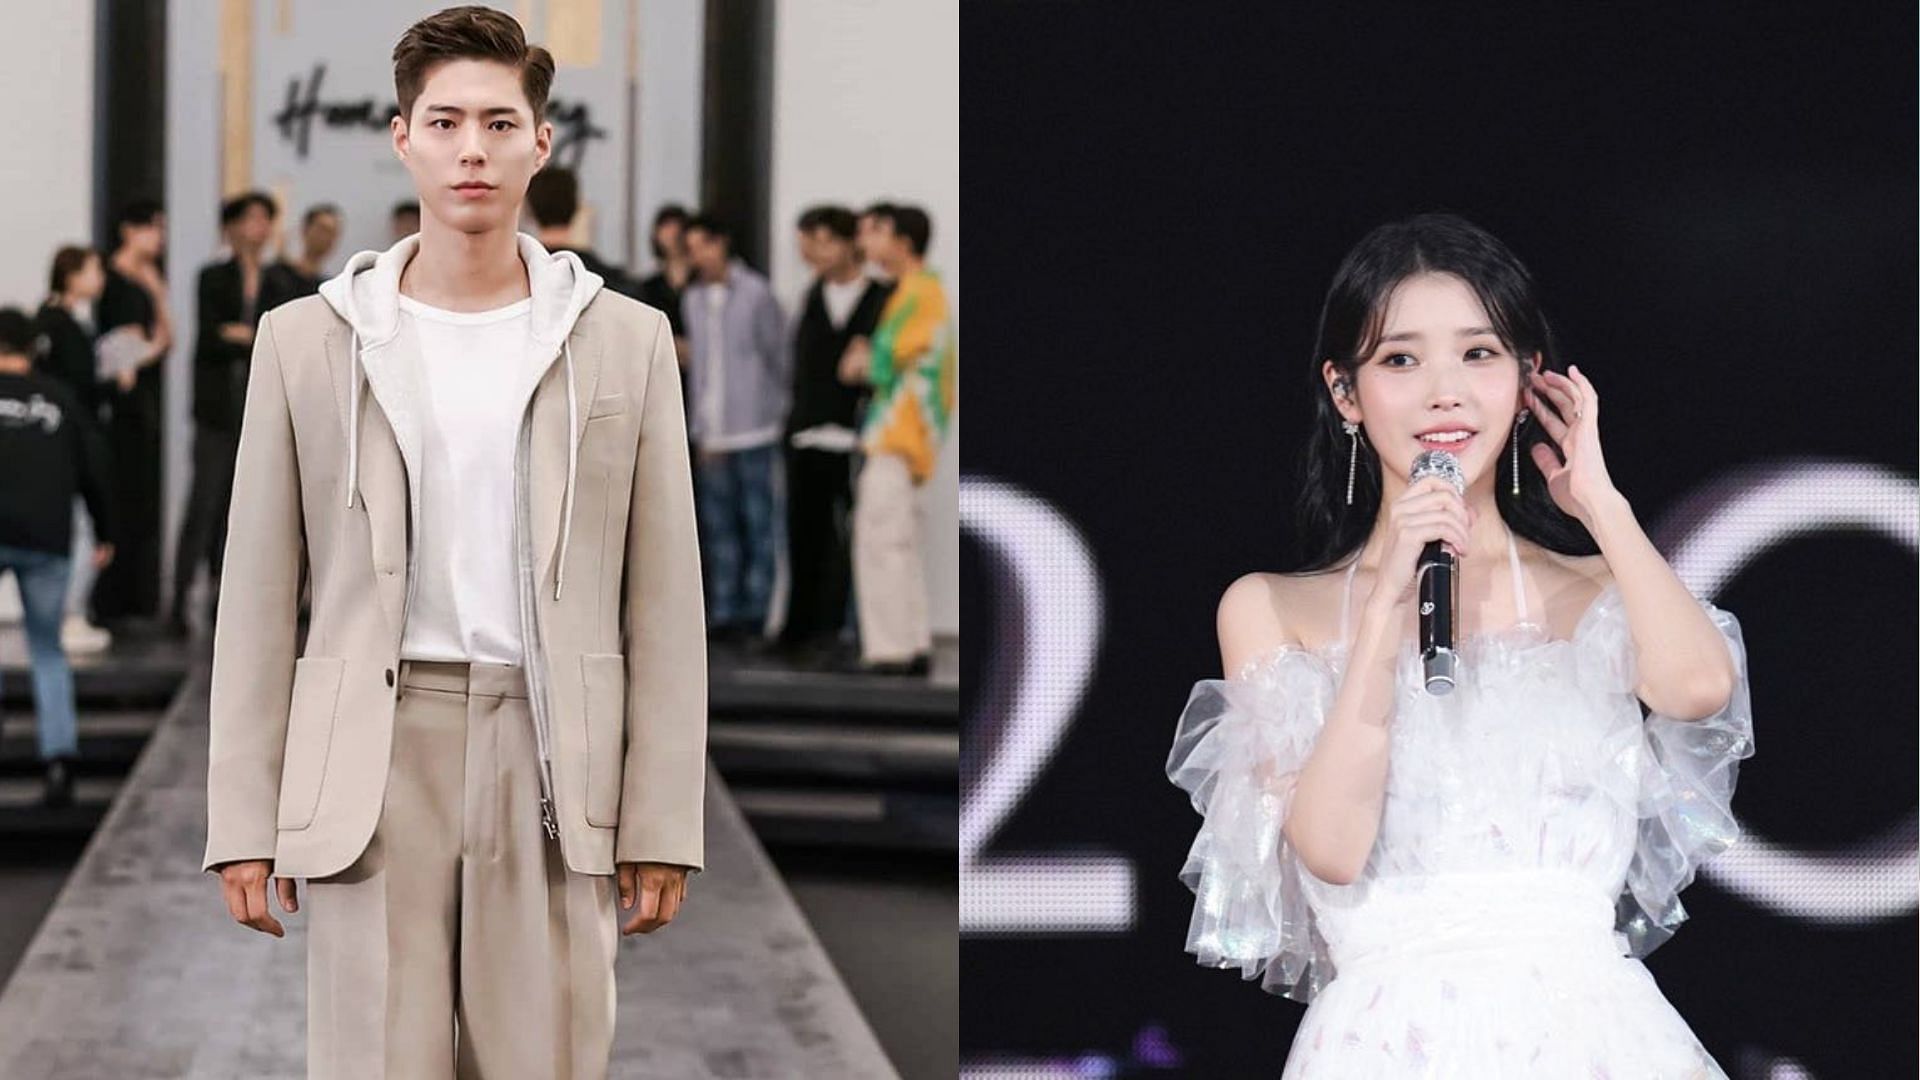 Park Bo-gum and IU to greet fans on small screen as lead romantic pair together for the first time (Images via Instagram/parkb0gum and dlwlrma)